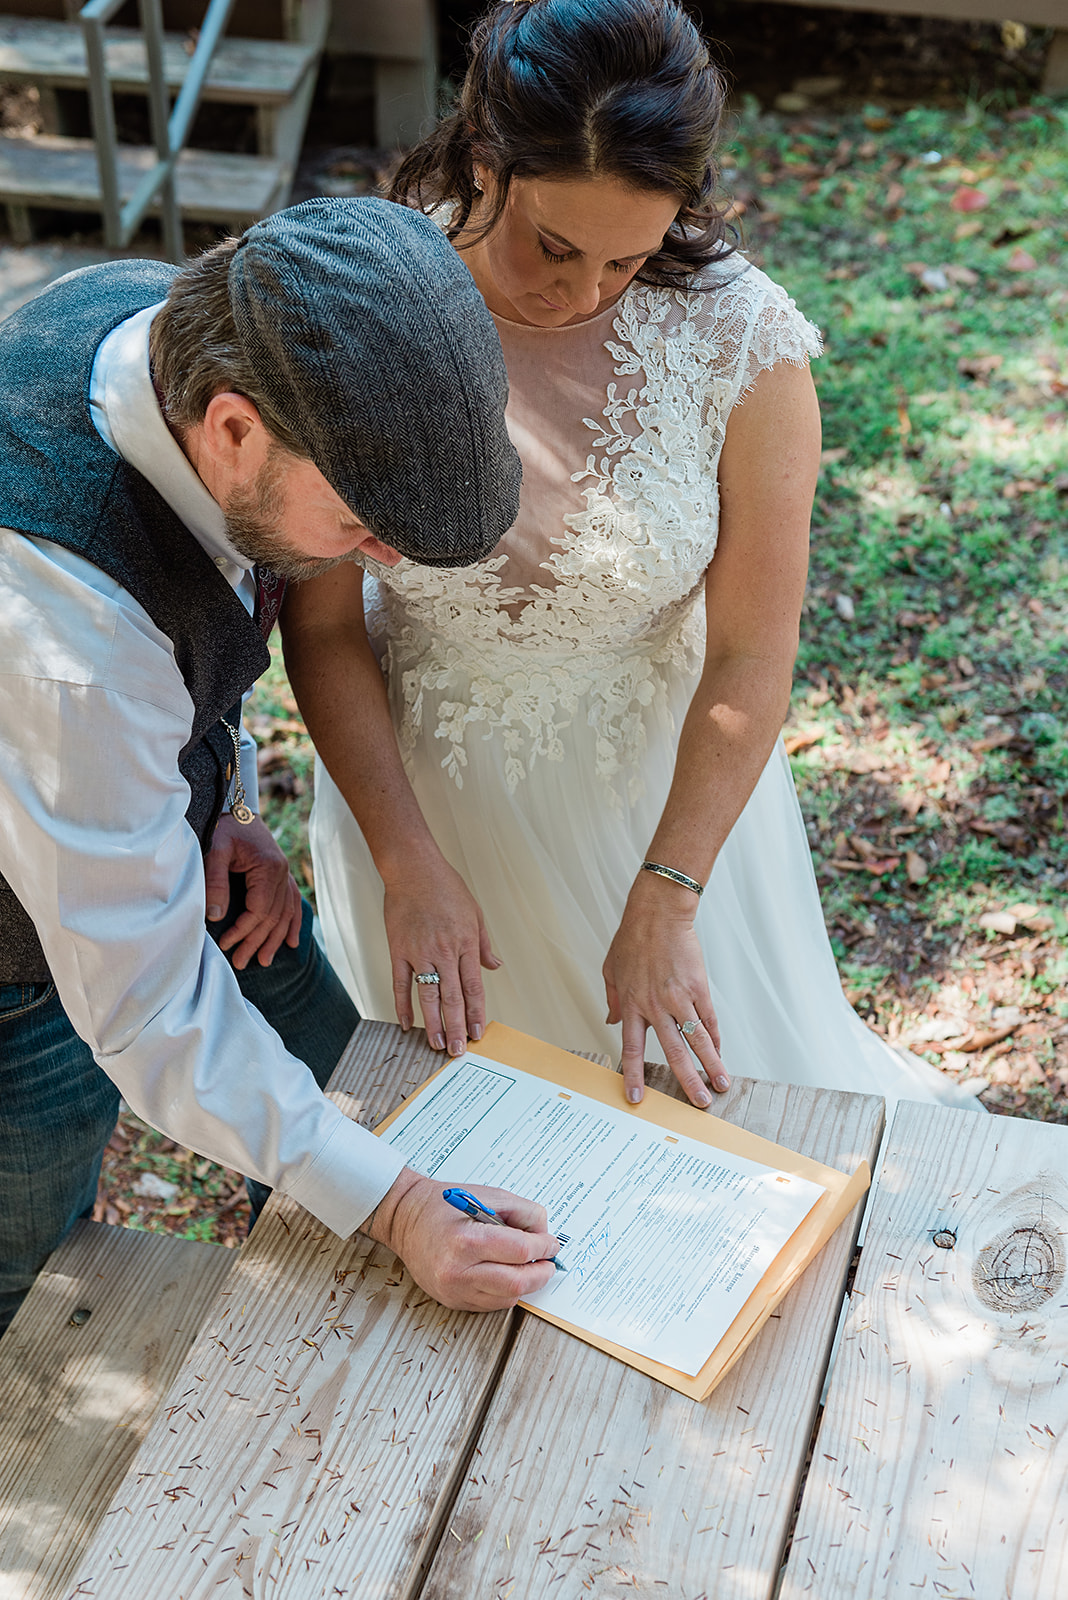 This picture is from my blog all about how to elope in Georgia. This is a picture of a bride and groom signing their marriage license.